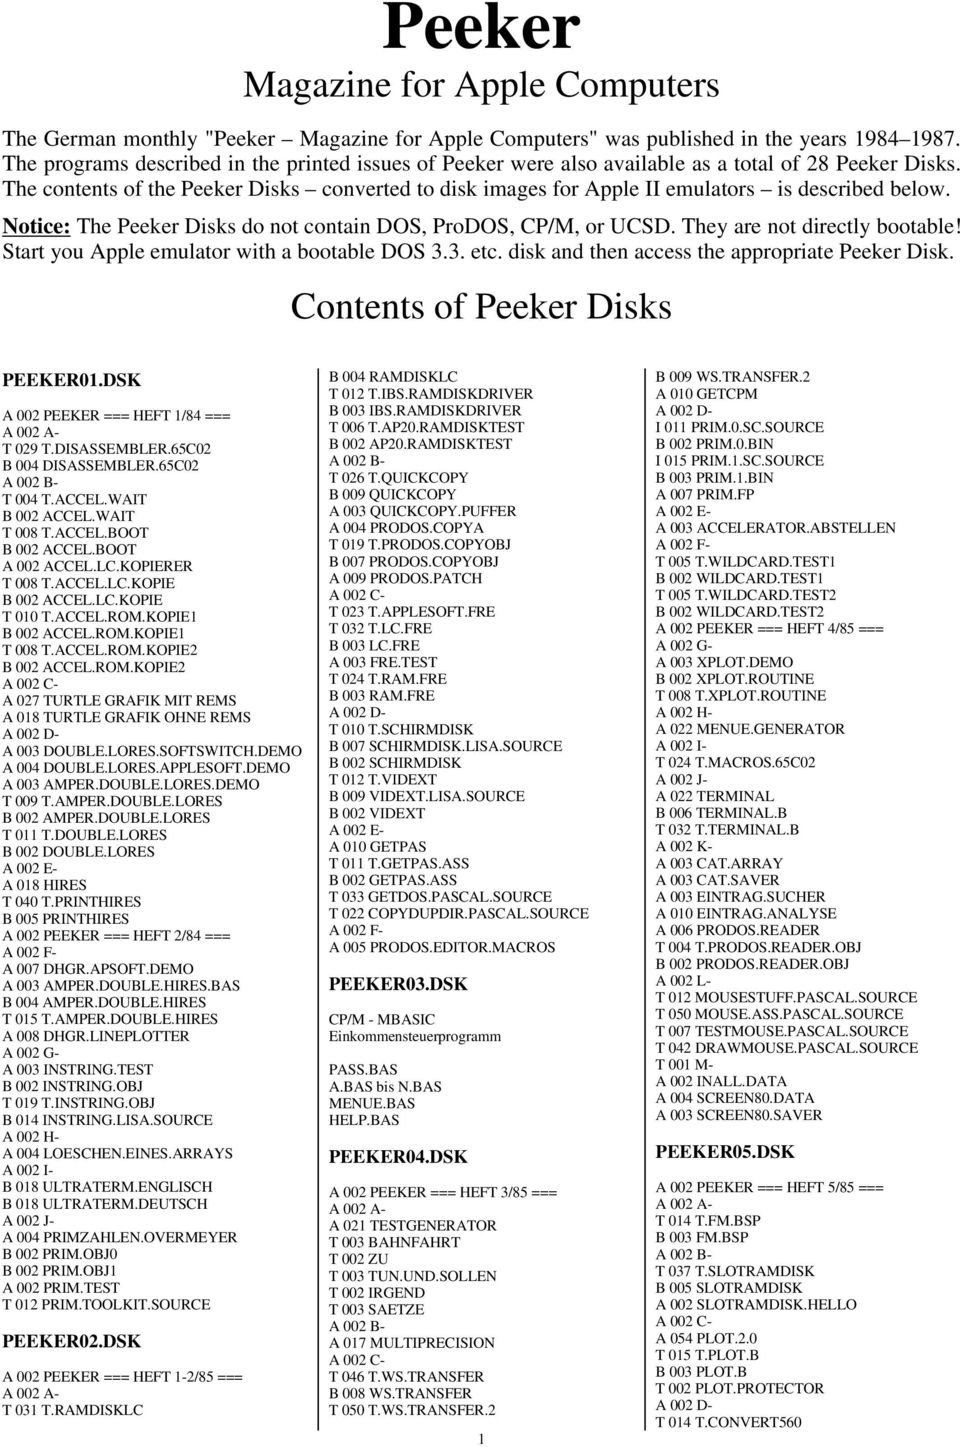 The contents of the Peeker Disks converted to disk images for Apple II emulators is described below. Notice: The Peeker Disks do not contain DOS, ProDOS, CP/M, or UCSD. They are not directly bootable!